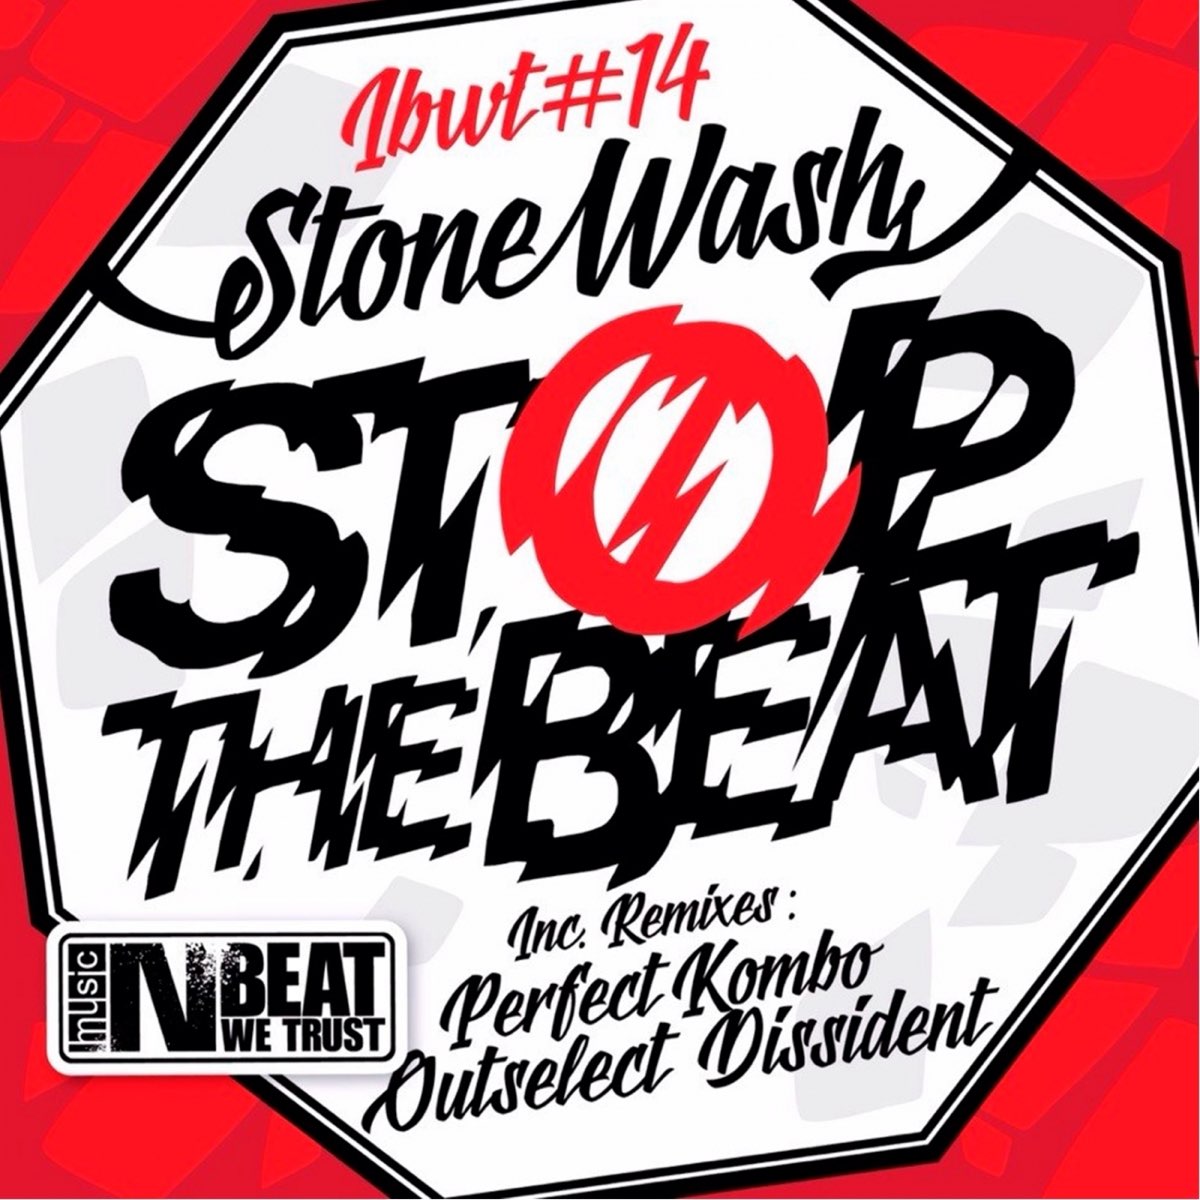 Стоп ремикс. Outselect Remix. Stop to the Beat. Inspired (ru) - in Beat we Trust (perfect Kombo Remix).